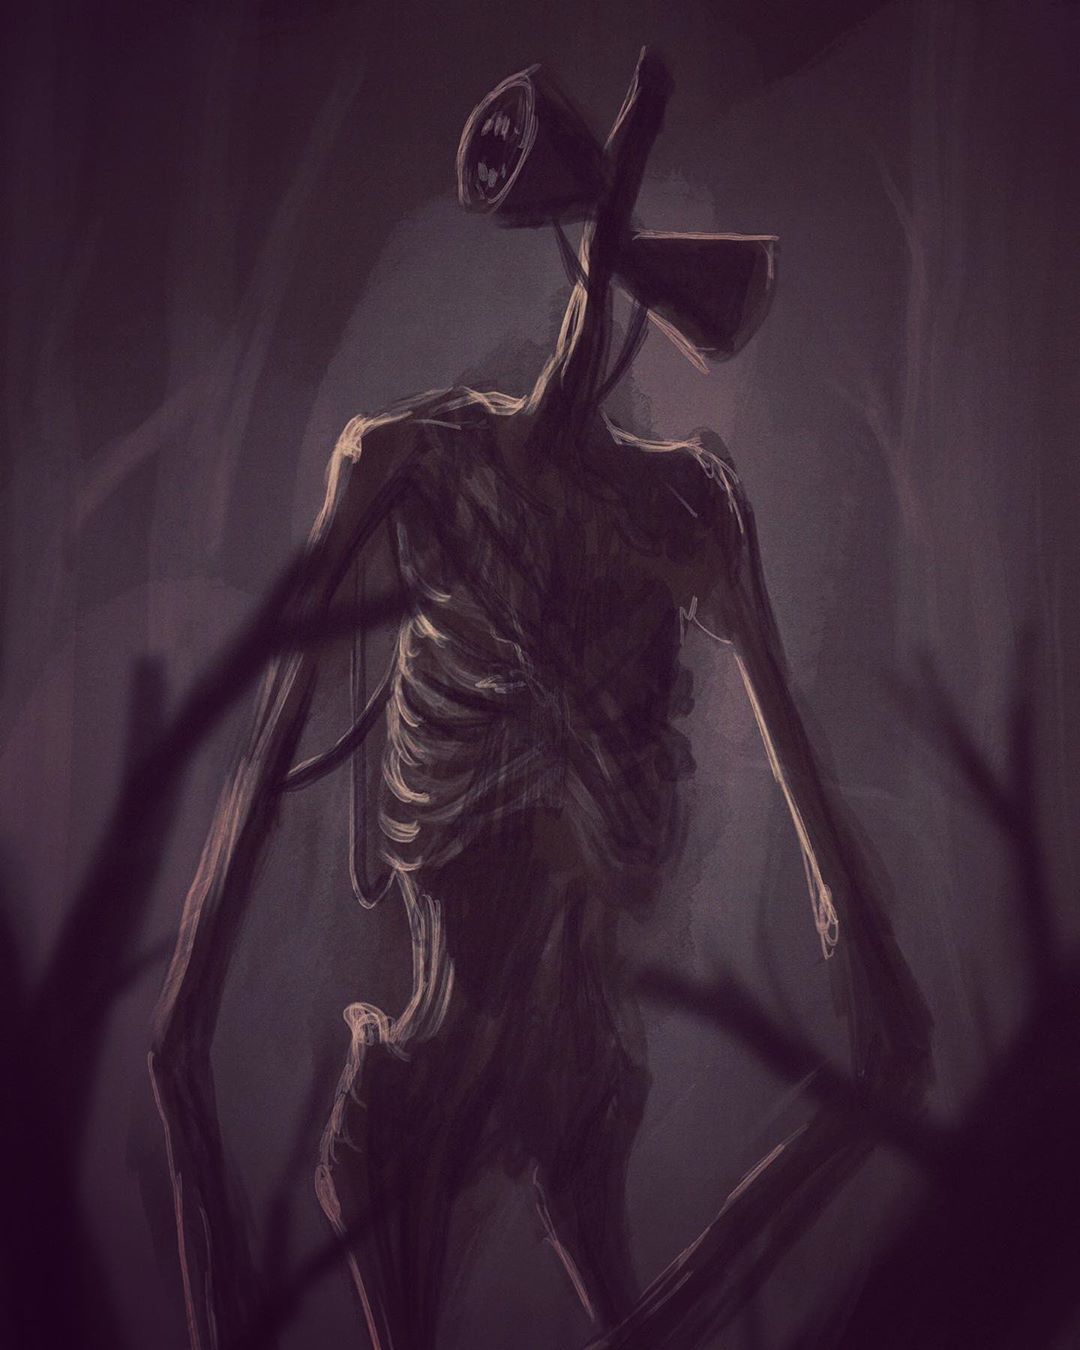 Trevor Henderson on Instagram: “Sirenhead sure has had a week! Thank you to all the new followers!”. Scary art, Scary image, Creepy art